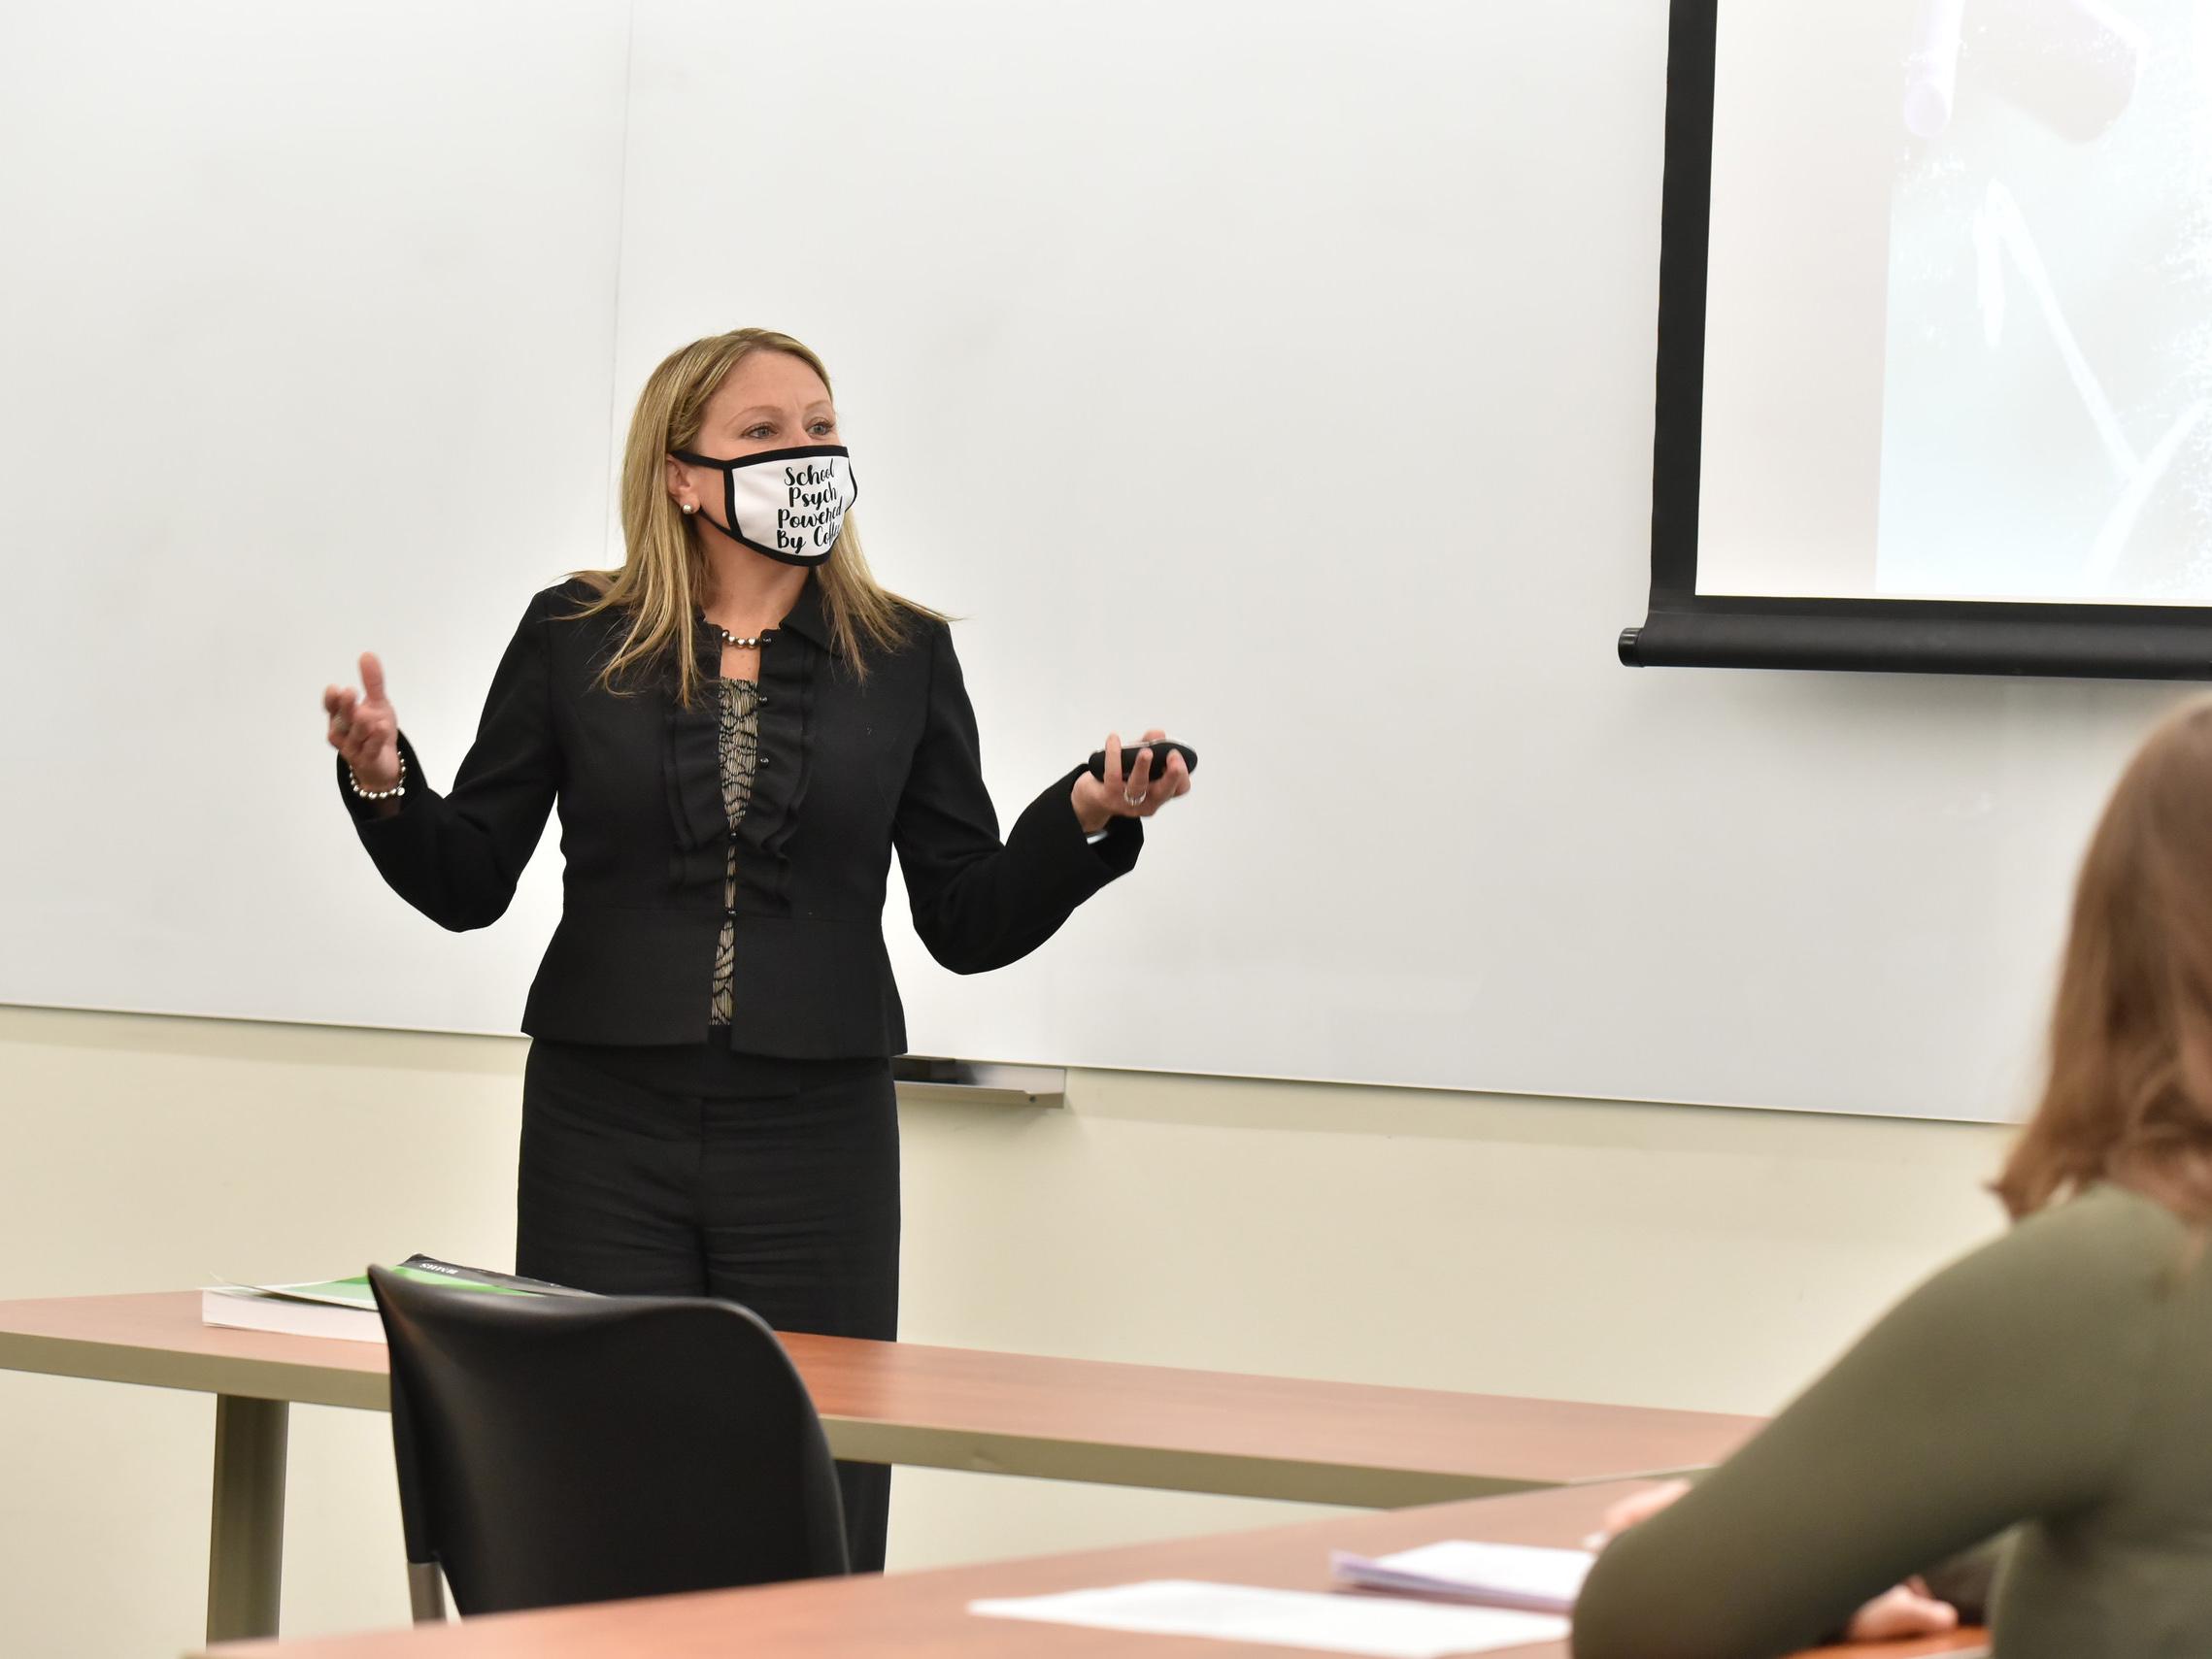 Counseling and psychological services faculty member Michelle Storie teaches in a classroom